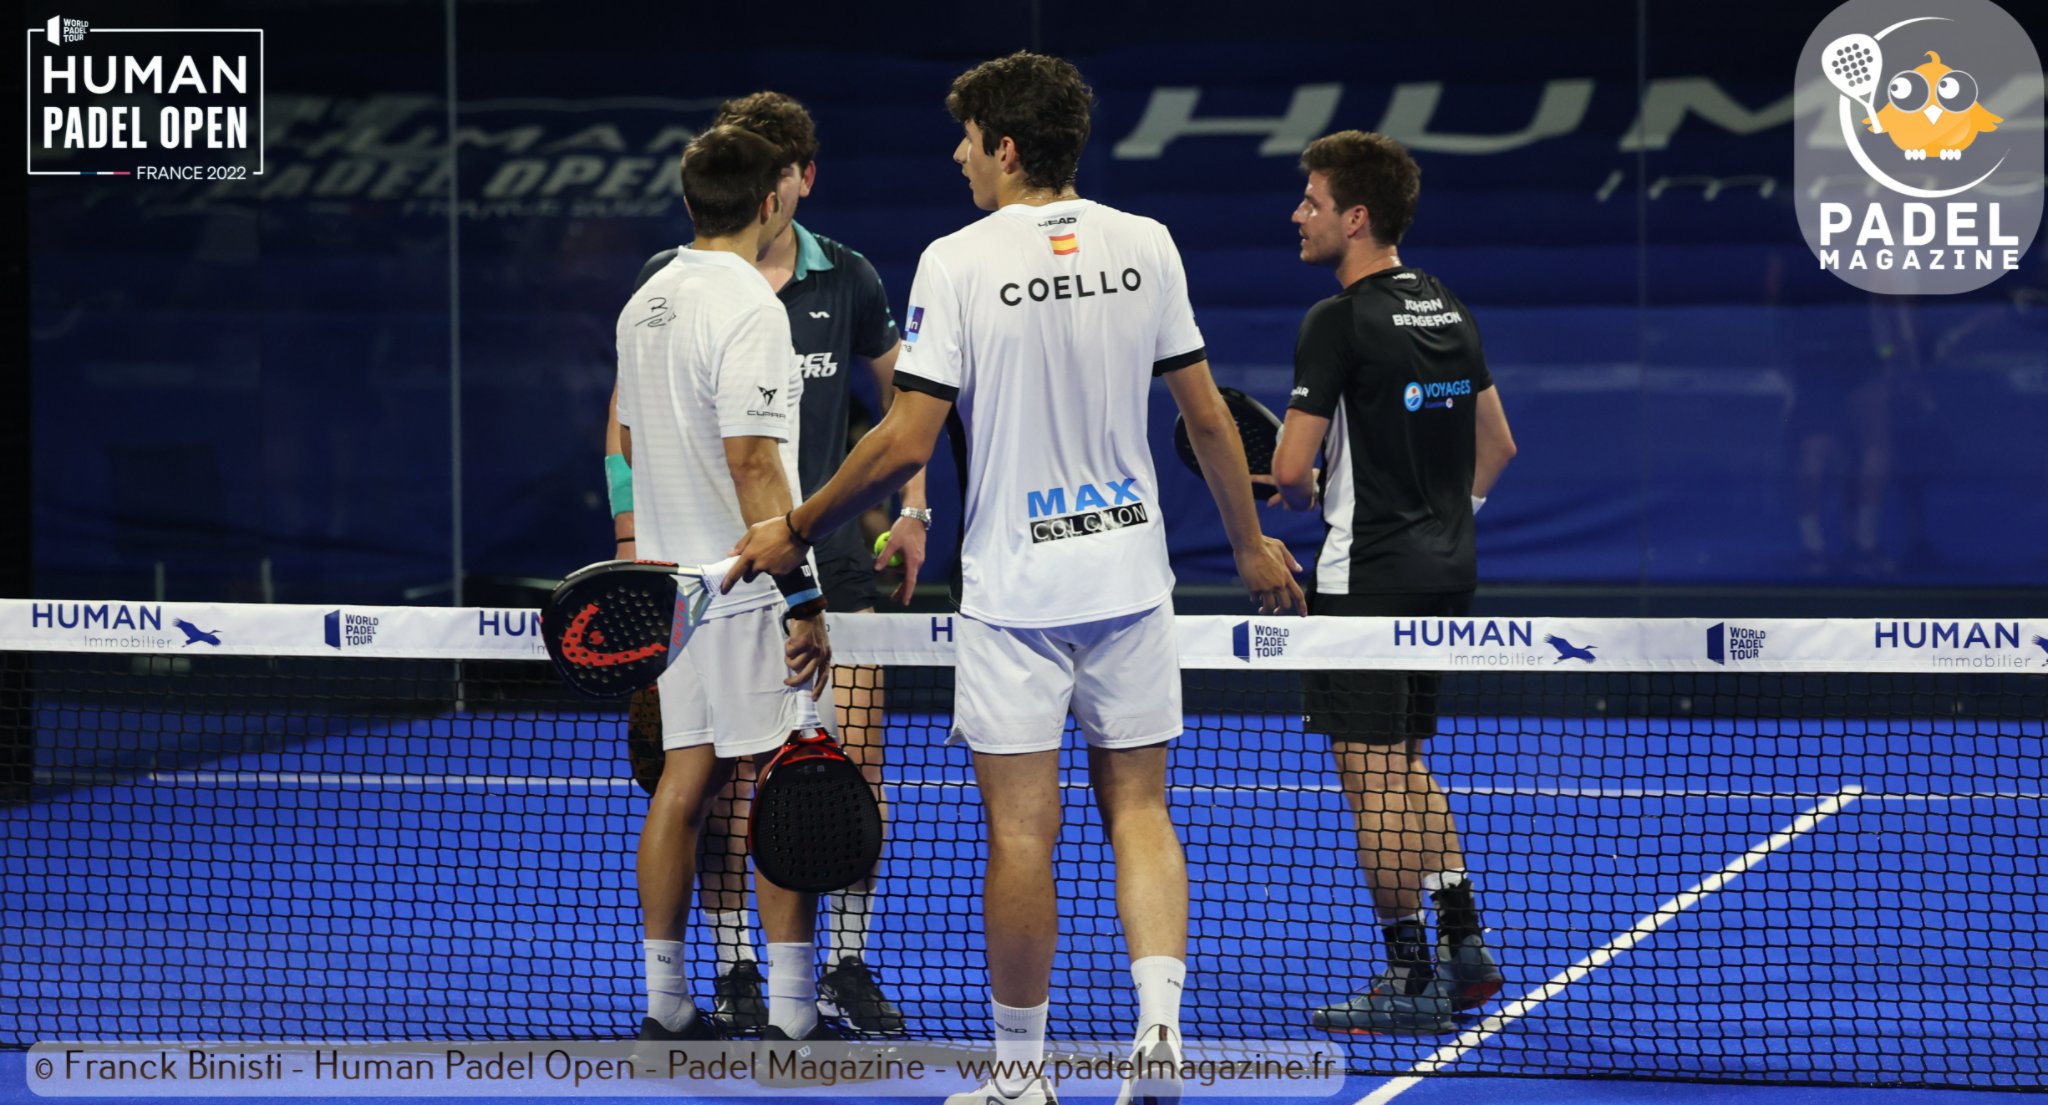 discussion between belasteguin and coello on one side of the net, leygue and bergeron on the other